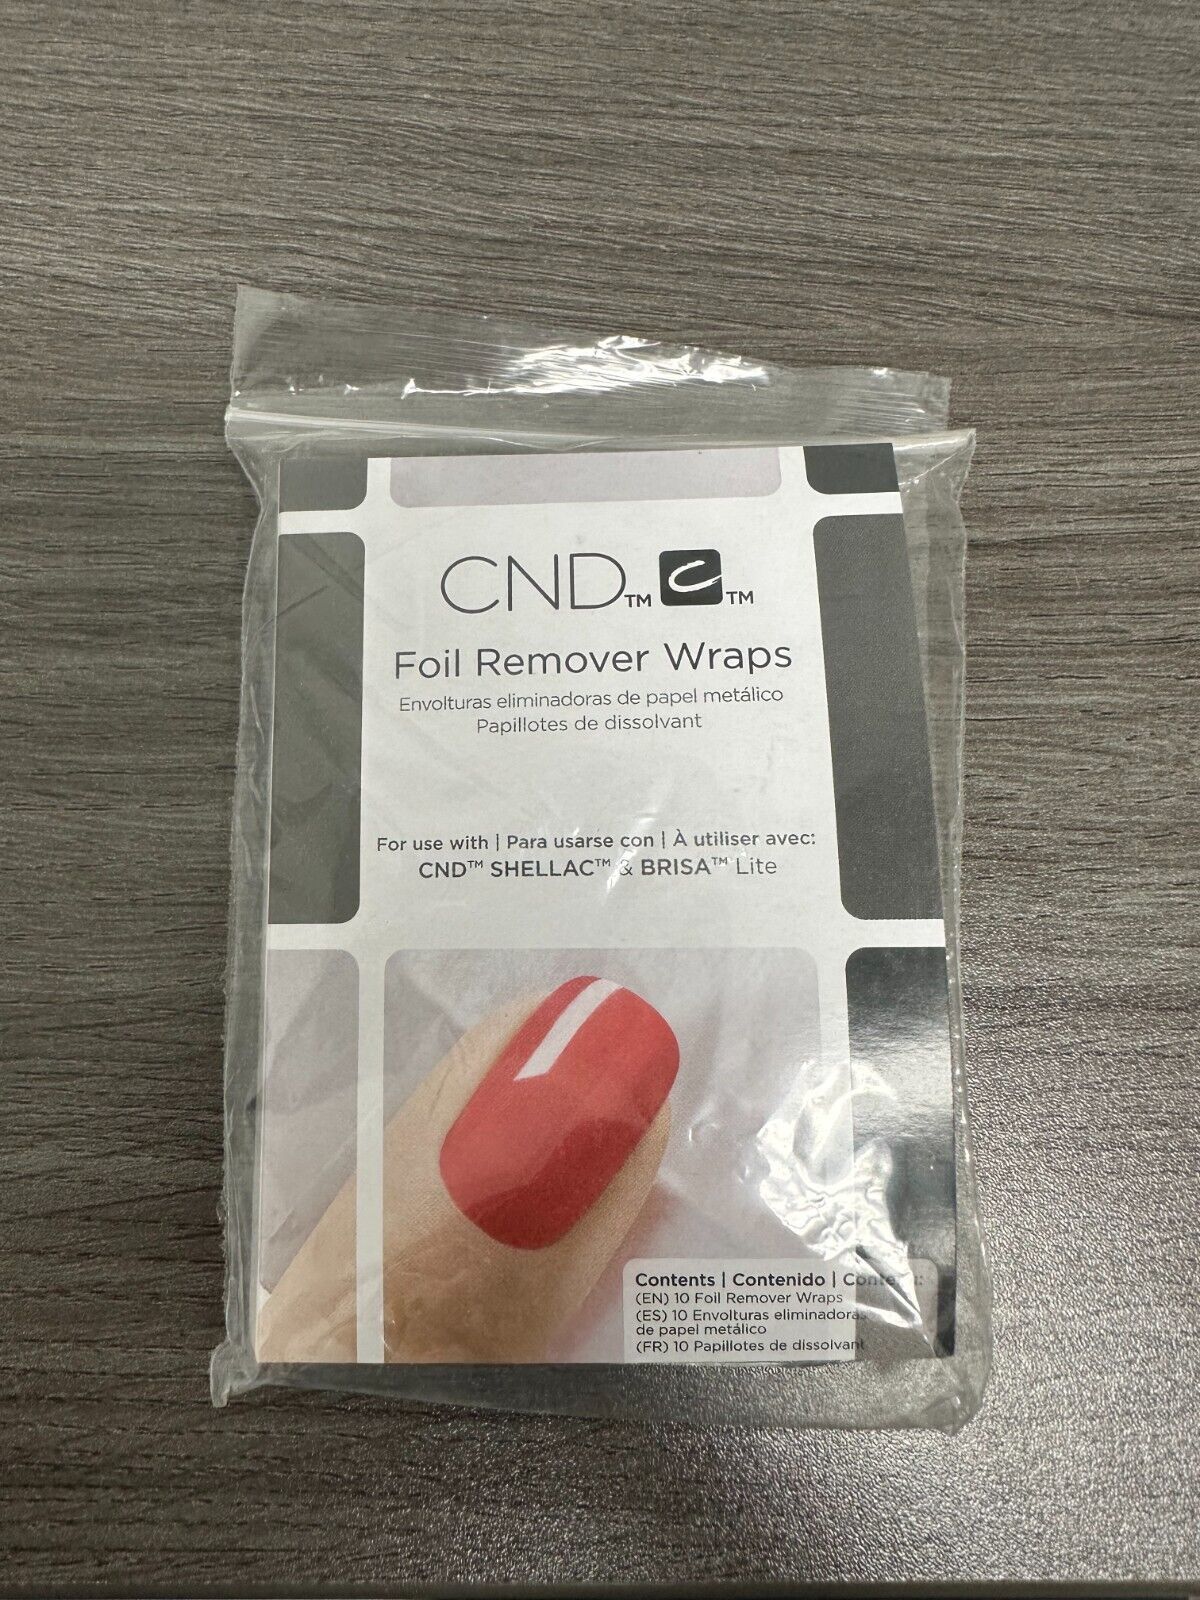 CND Foil Remover Wraps To Use With Shellac & Brisa Lite - 4 packs FREE SHIPPING! - £6.83 GBP